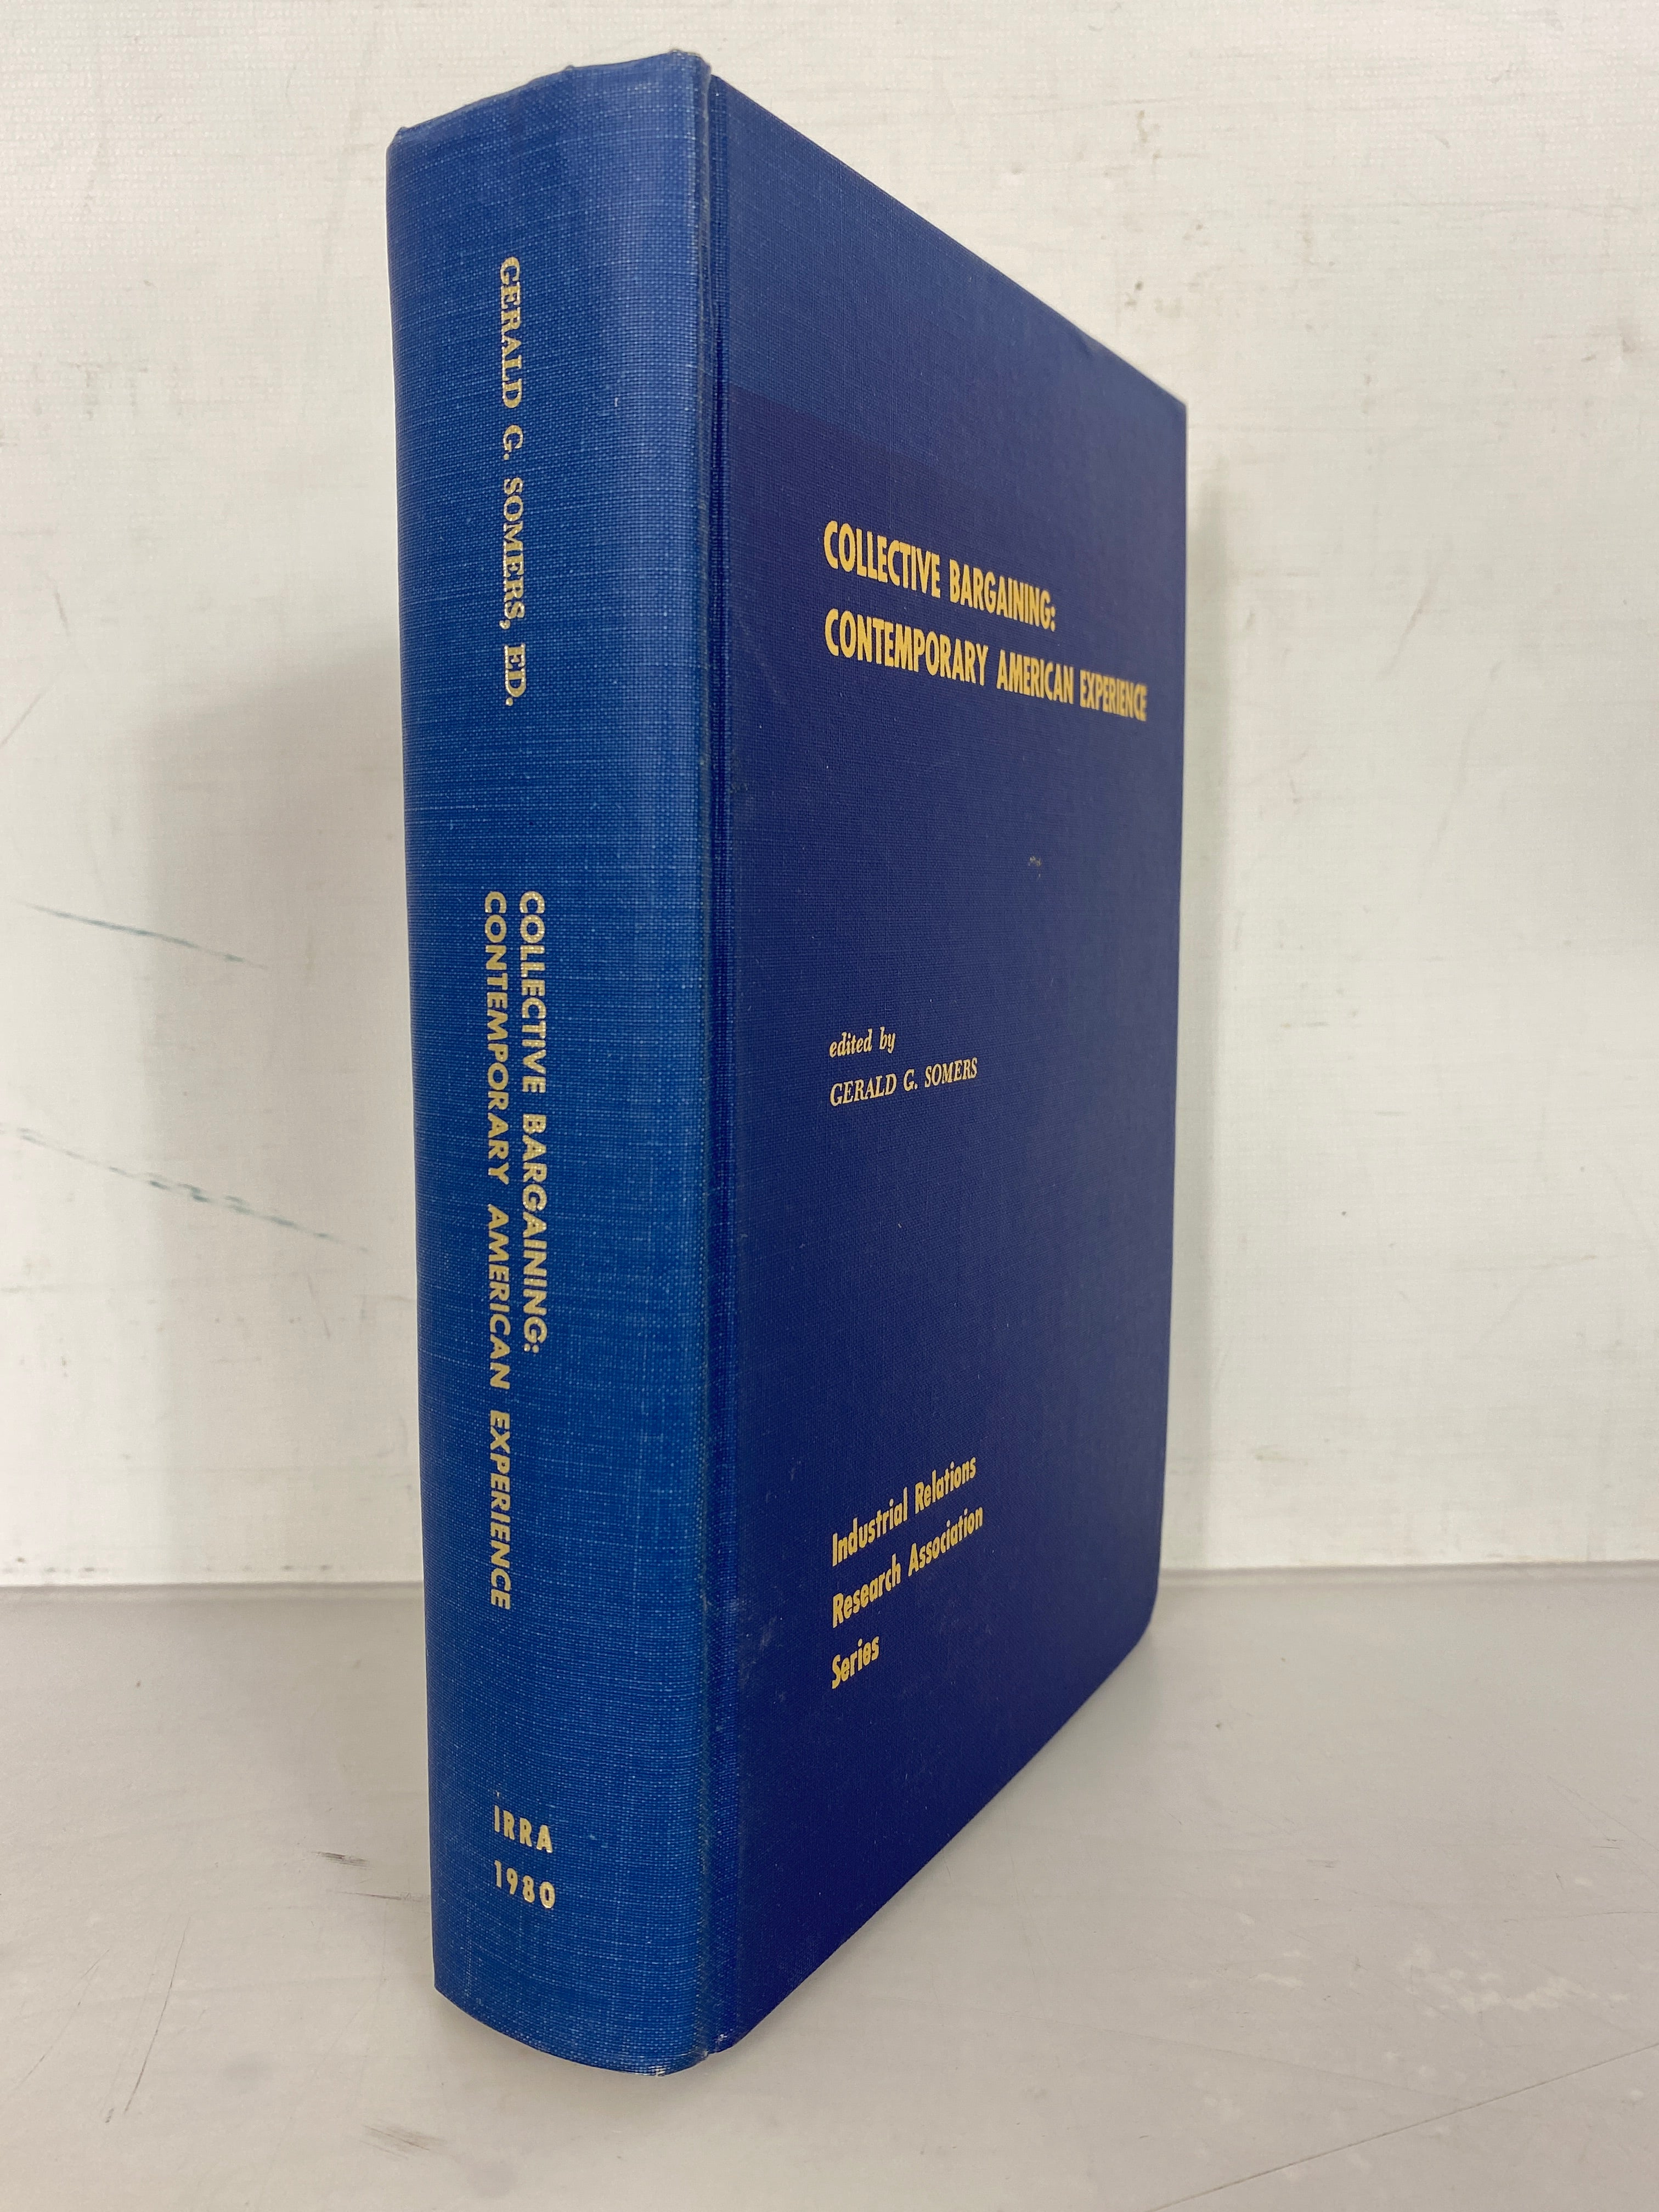 Lot of 2 Labor Relations Books: Coalition Bargaining 1969, Arbitration Cases in Public Employment 1969 HC SC